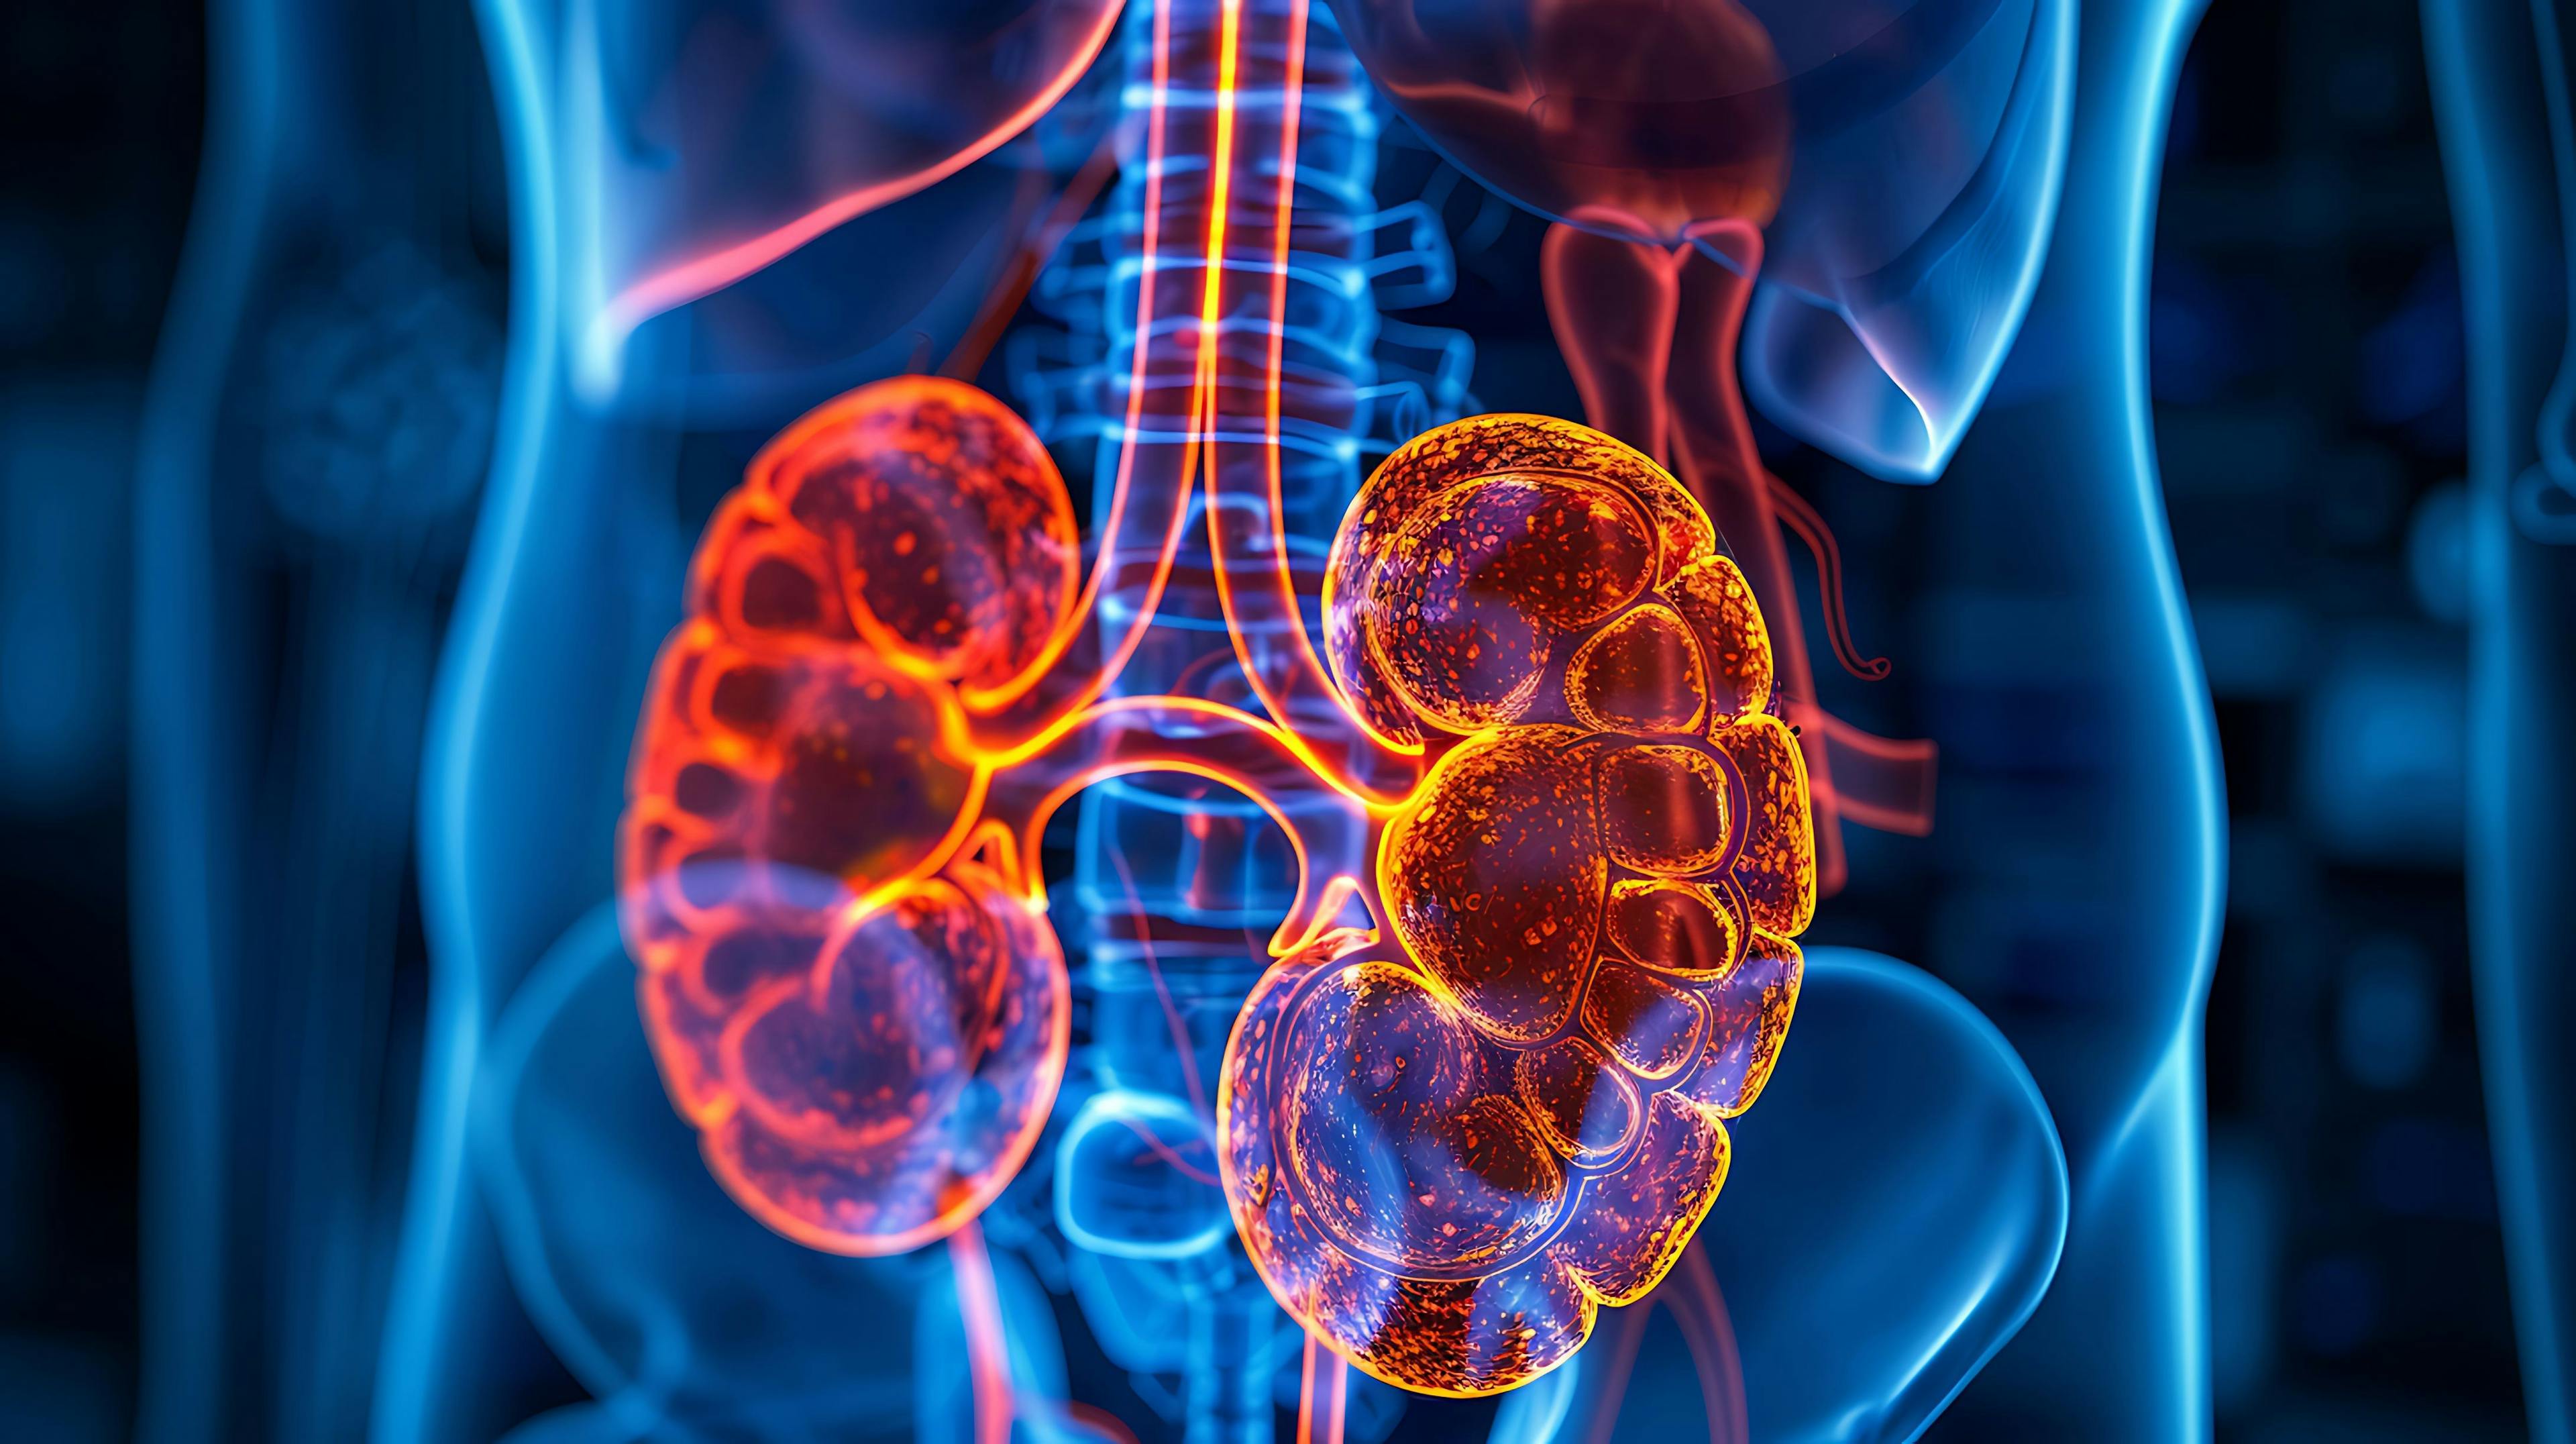 Person acute kidney injury Comprehensive image overview of kidneys showing sudden loss of function | Image Credit: © Premium Graphics - stock.adobe.com.